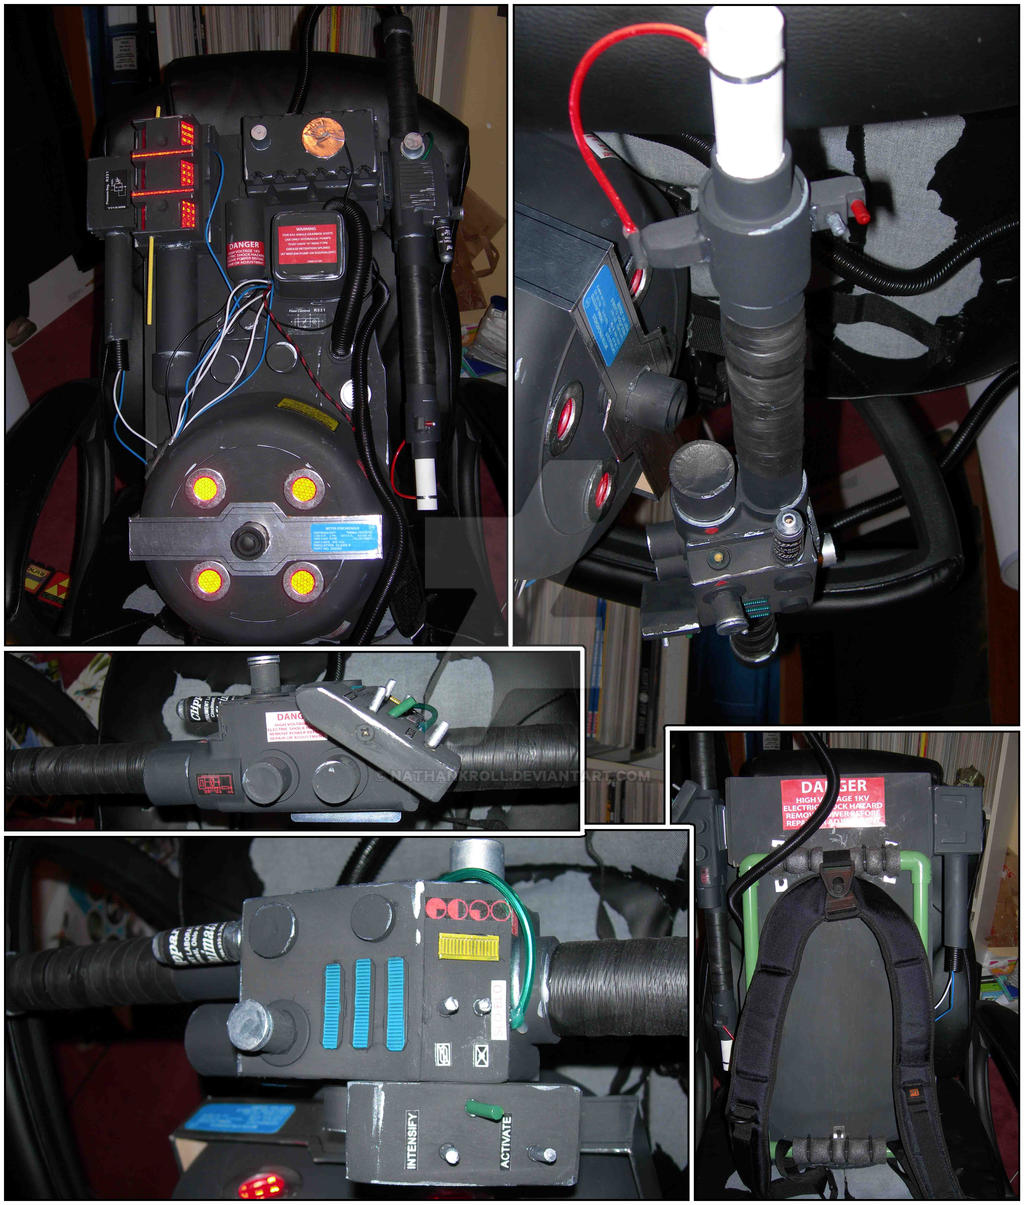 DIY Ghostbusters Proton Pack II by NathanKroll on DeviantArt